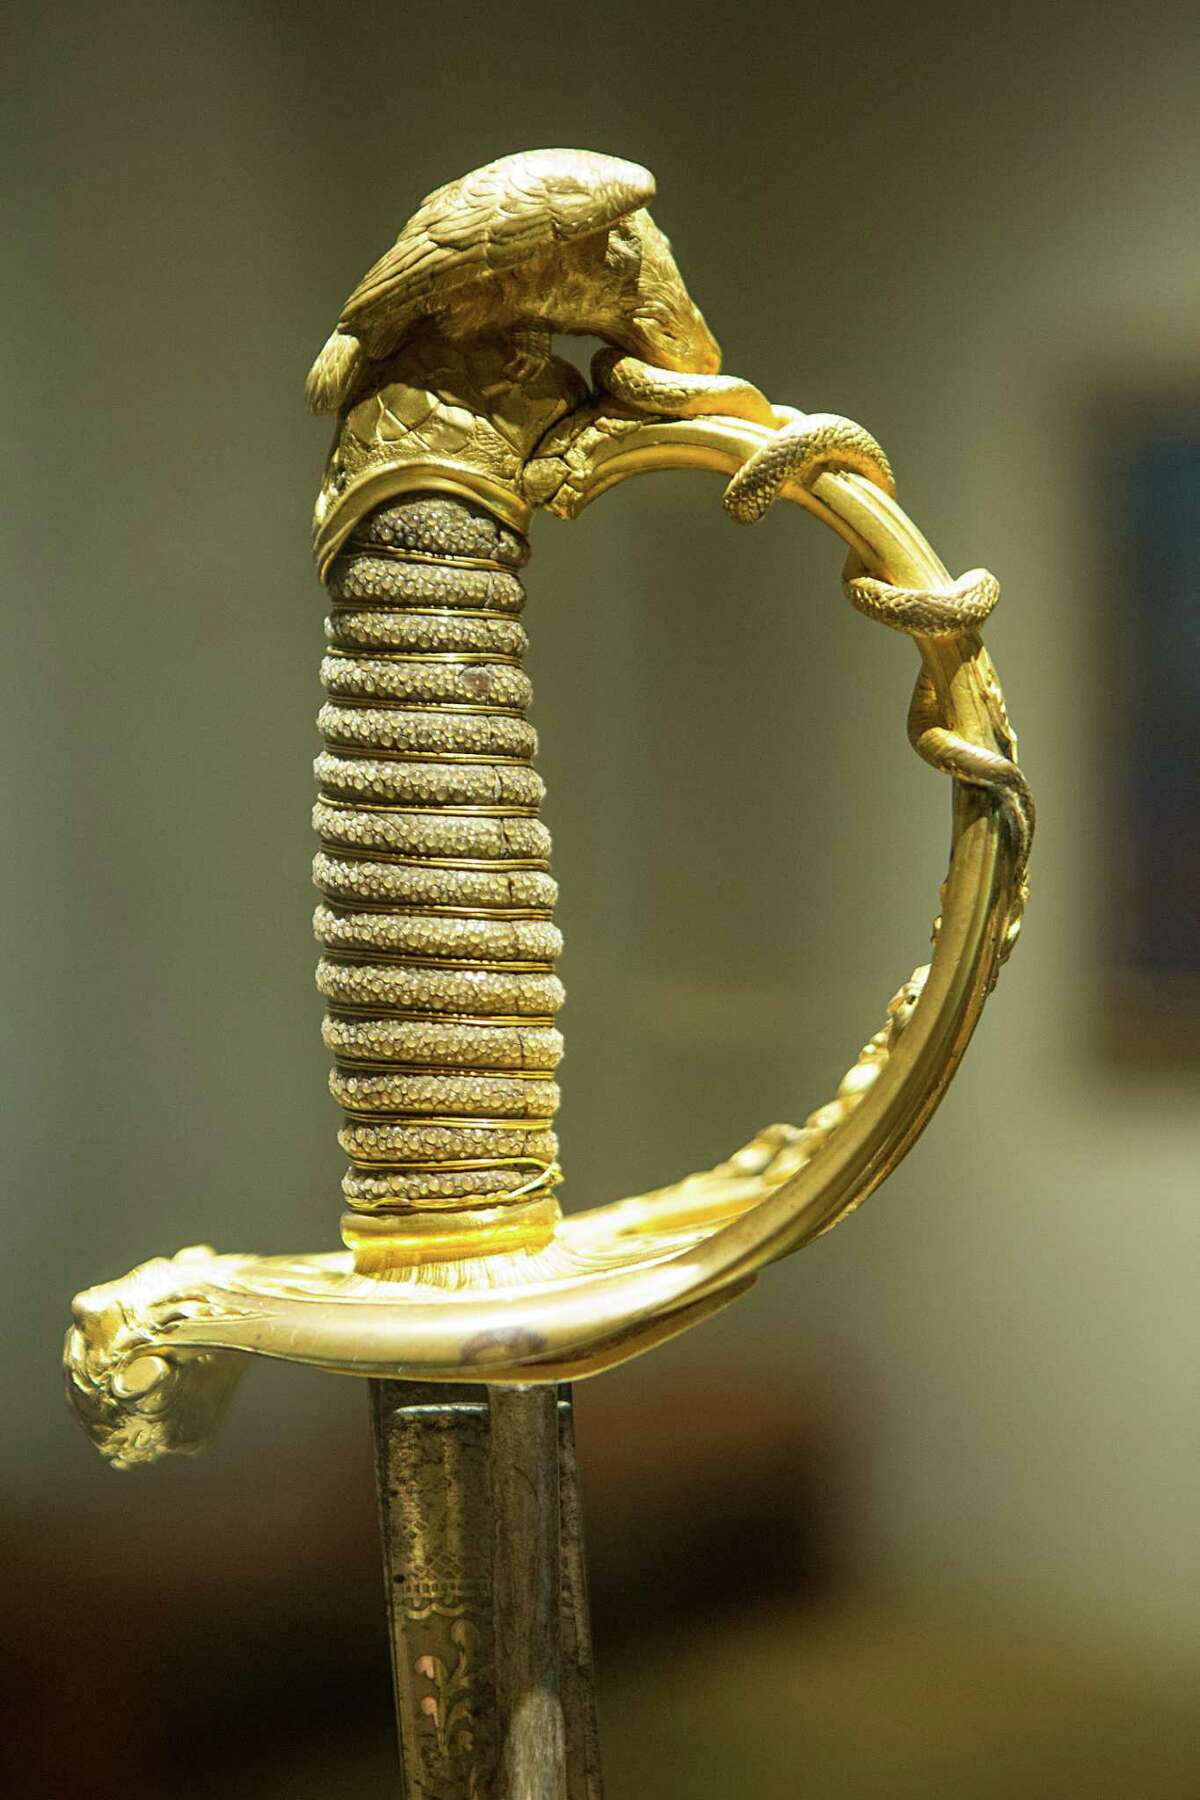 The hilt of the Santa Anna sword at the Briscoe Western Art Museum is by far the blade’s most distinguishing feature. It’s a sculpted homage to Mexico’s coat of arms, showcasing a hawk with a rattlesnake in its beak.